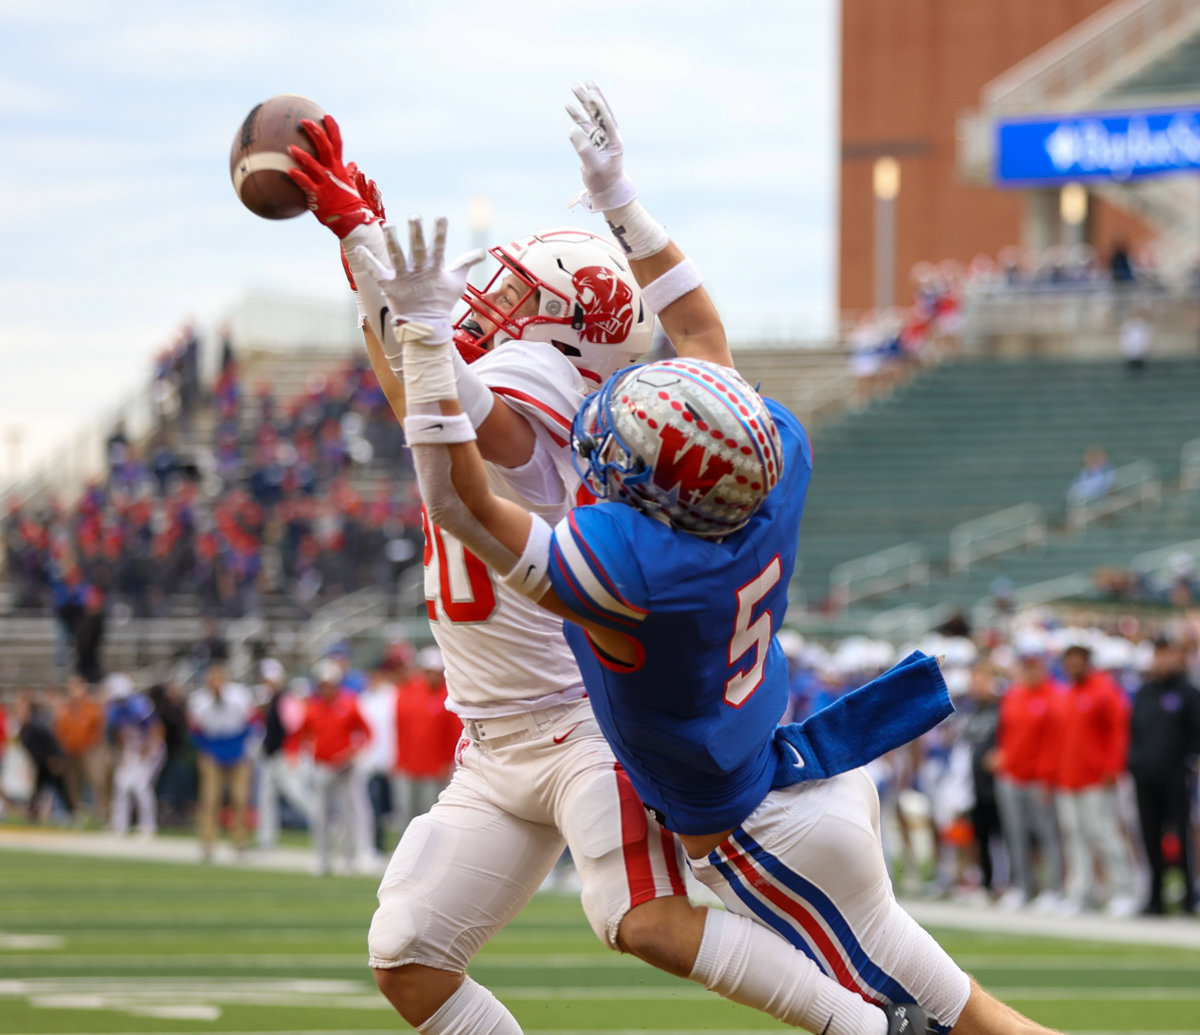 Katy Tigers defensive back Brady Englett (20) breaks up a would-be touchdown pass intended for Westlake Chaparrals wide receiver Keaton Kubecka (5) during the Class 6A Division II state semifinal  game between Katy and Westlake on December 11, 2021 in Waco, Texas.